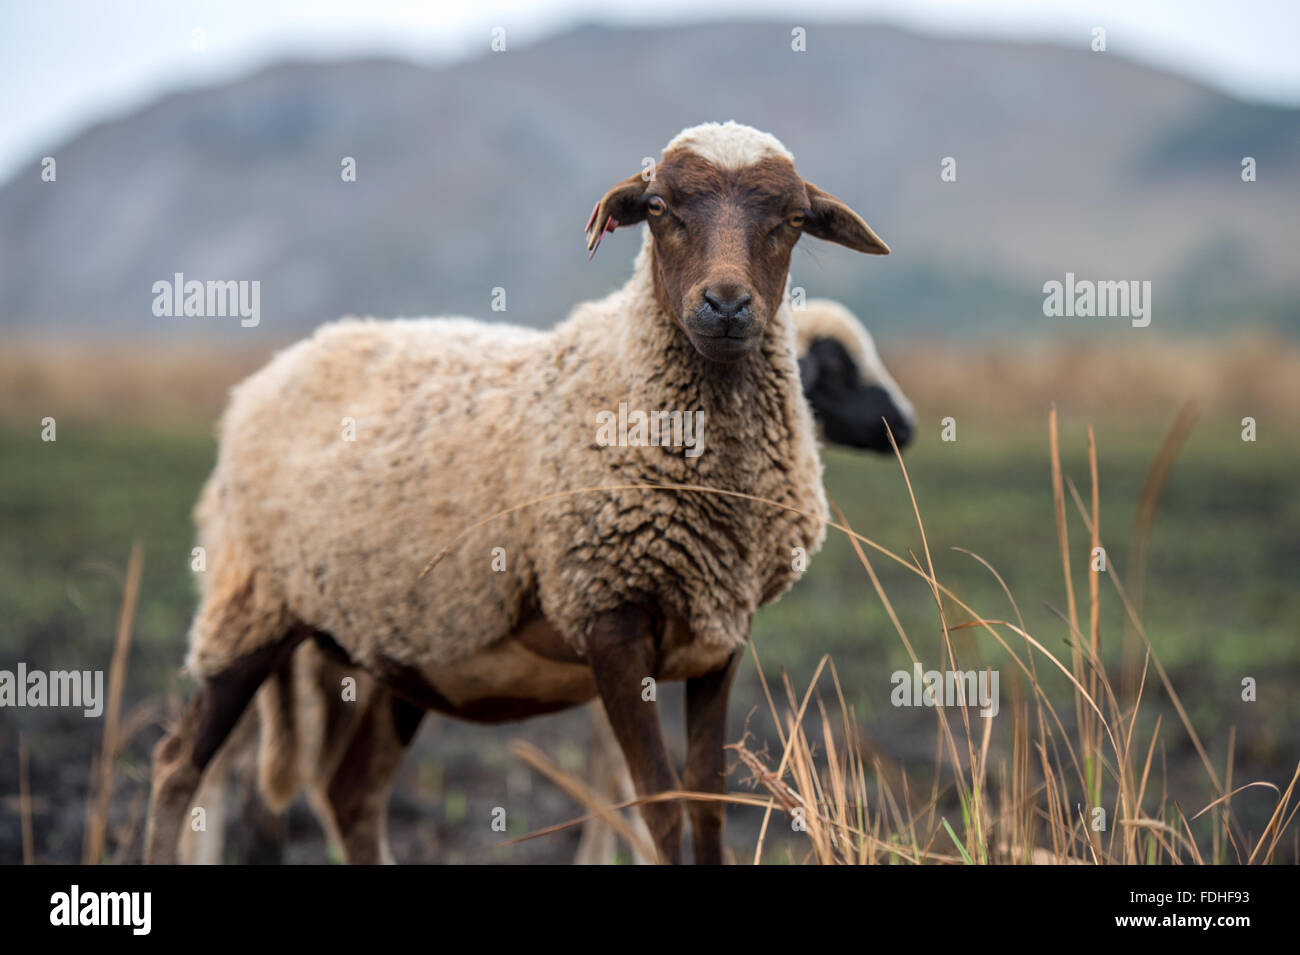 Sheep grazing in the Hhohho region of Swaziland, Africa. Stock Photo